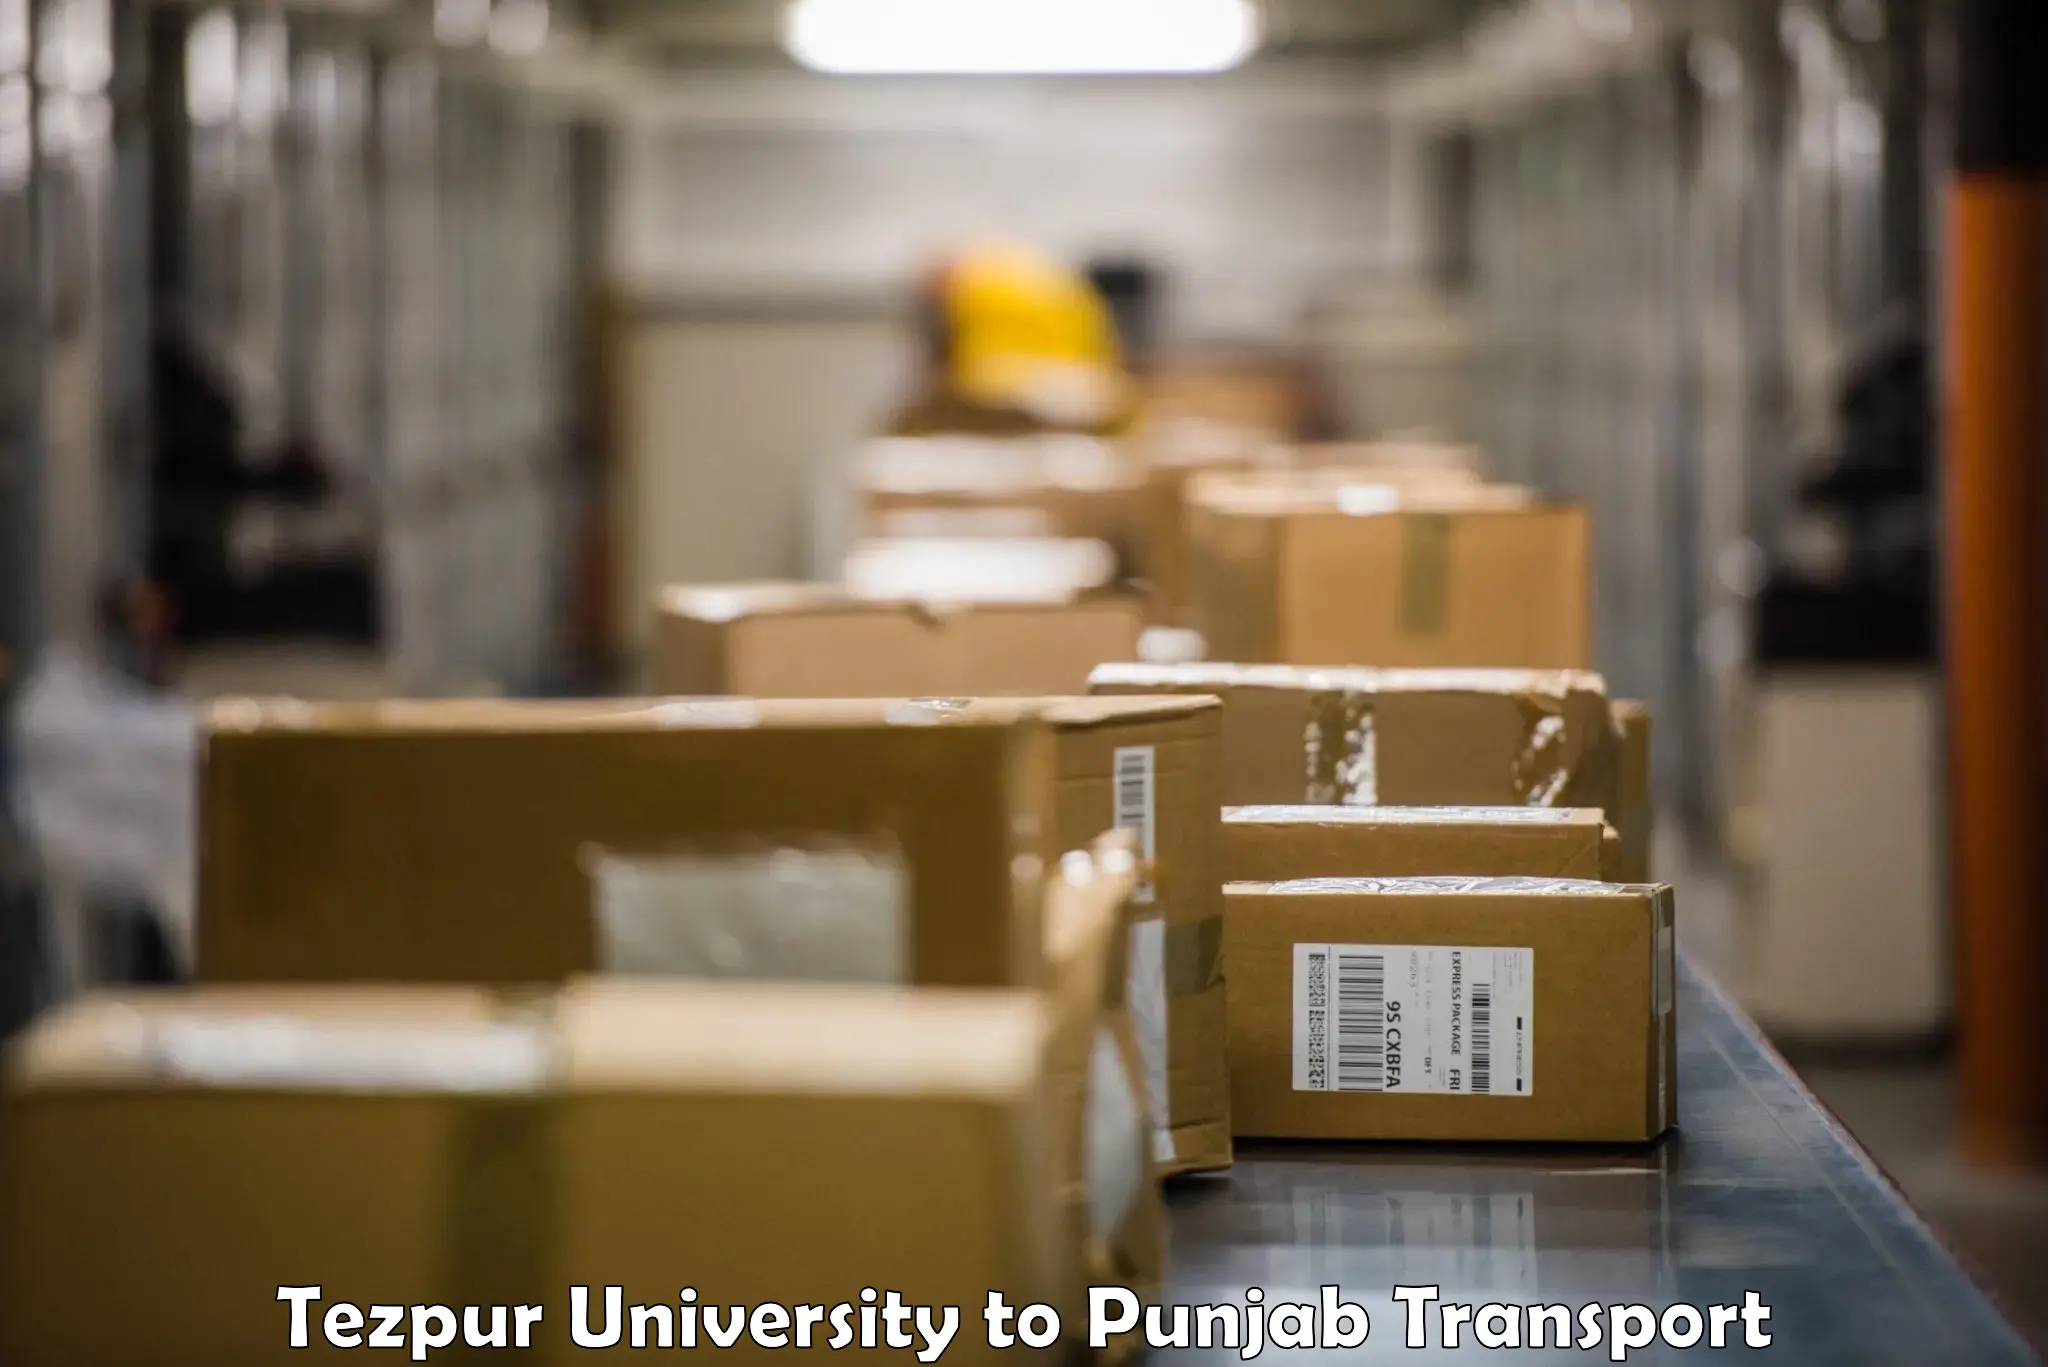 Container transport service Tezpur University to Dhilwan